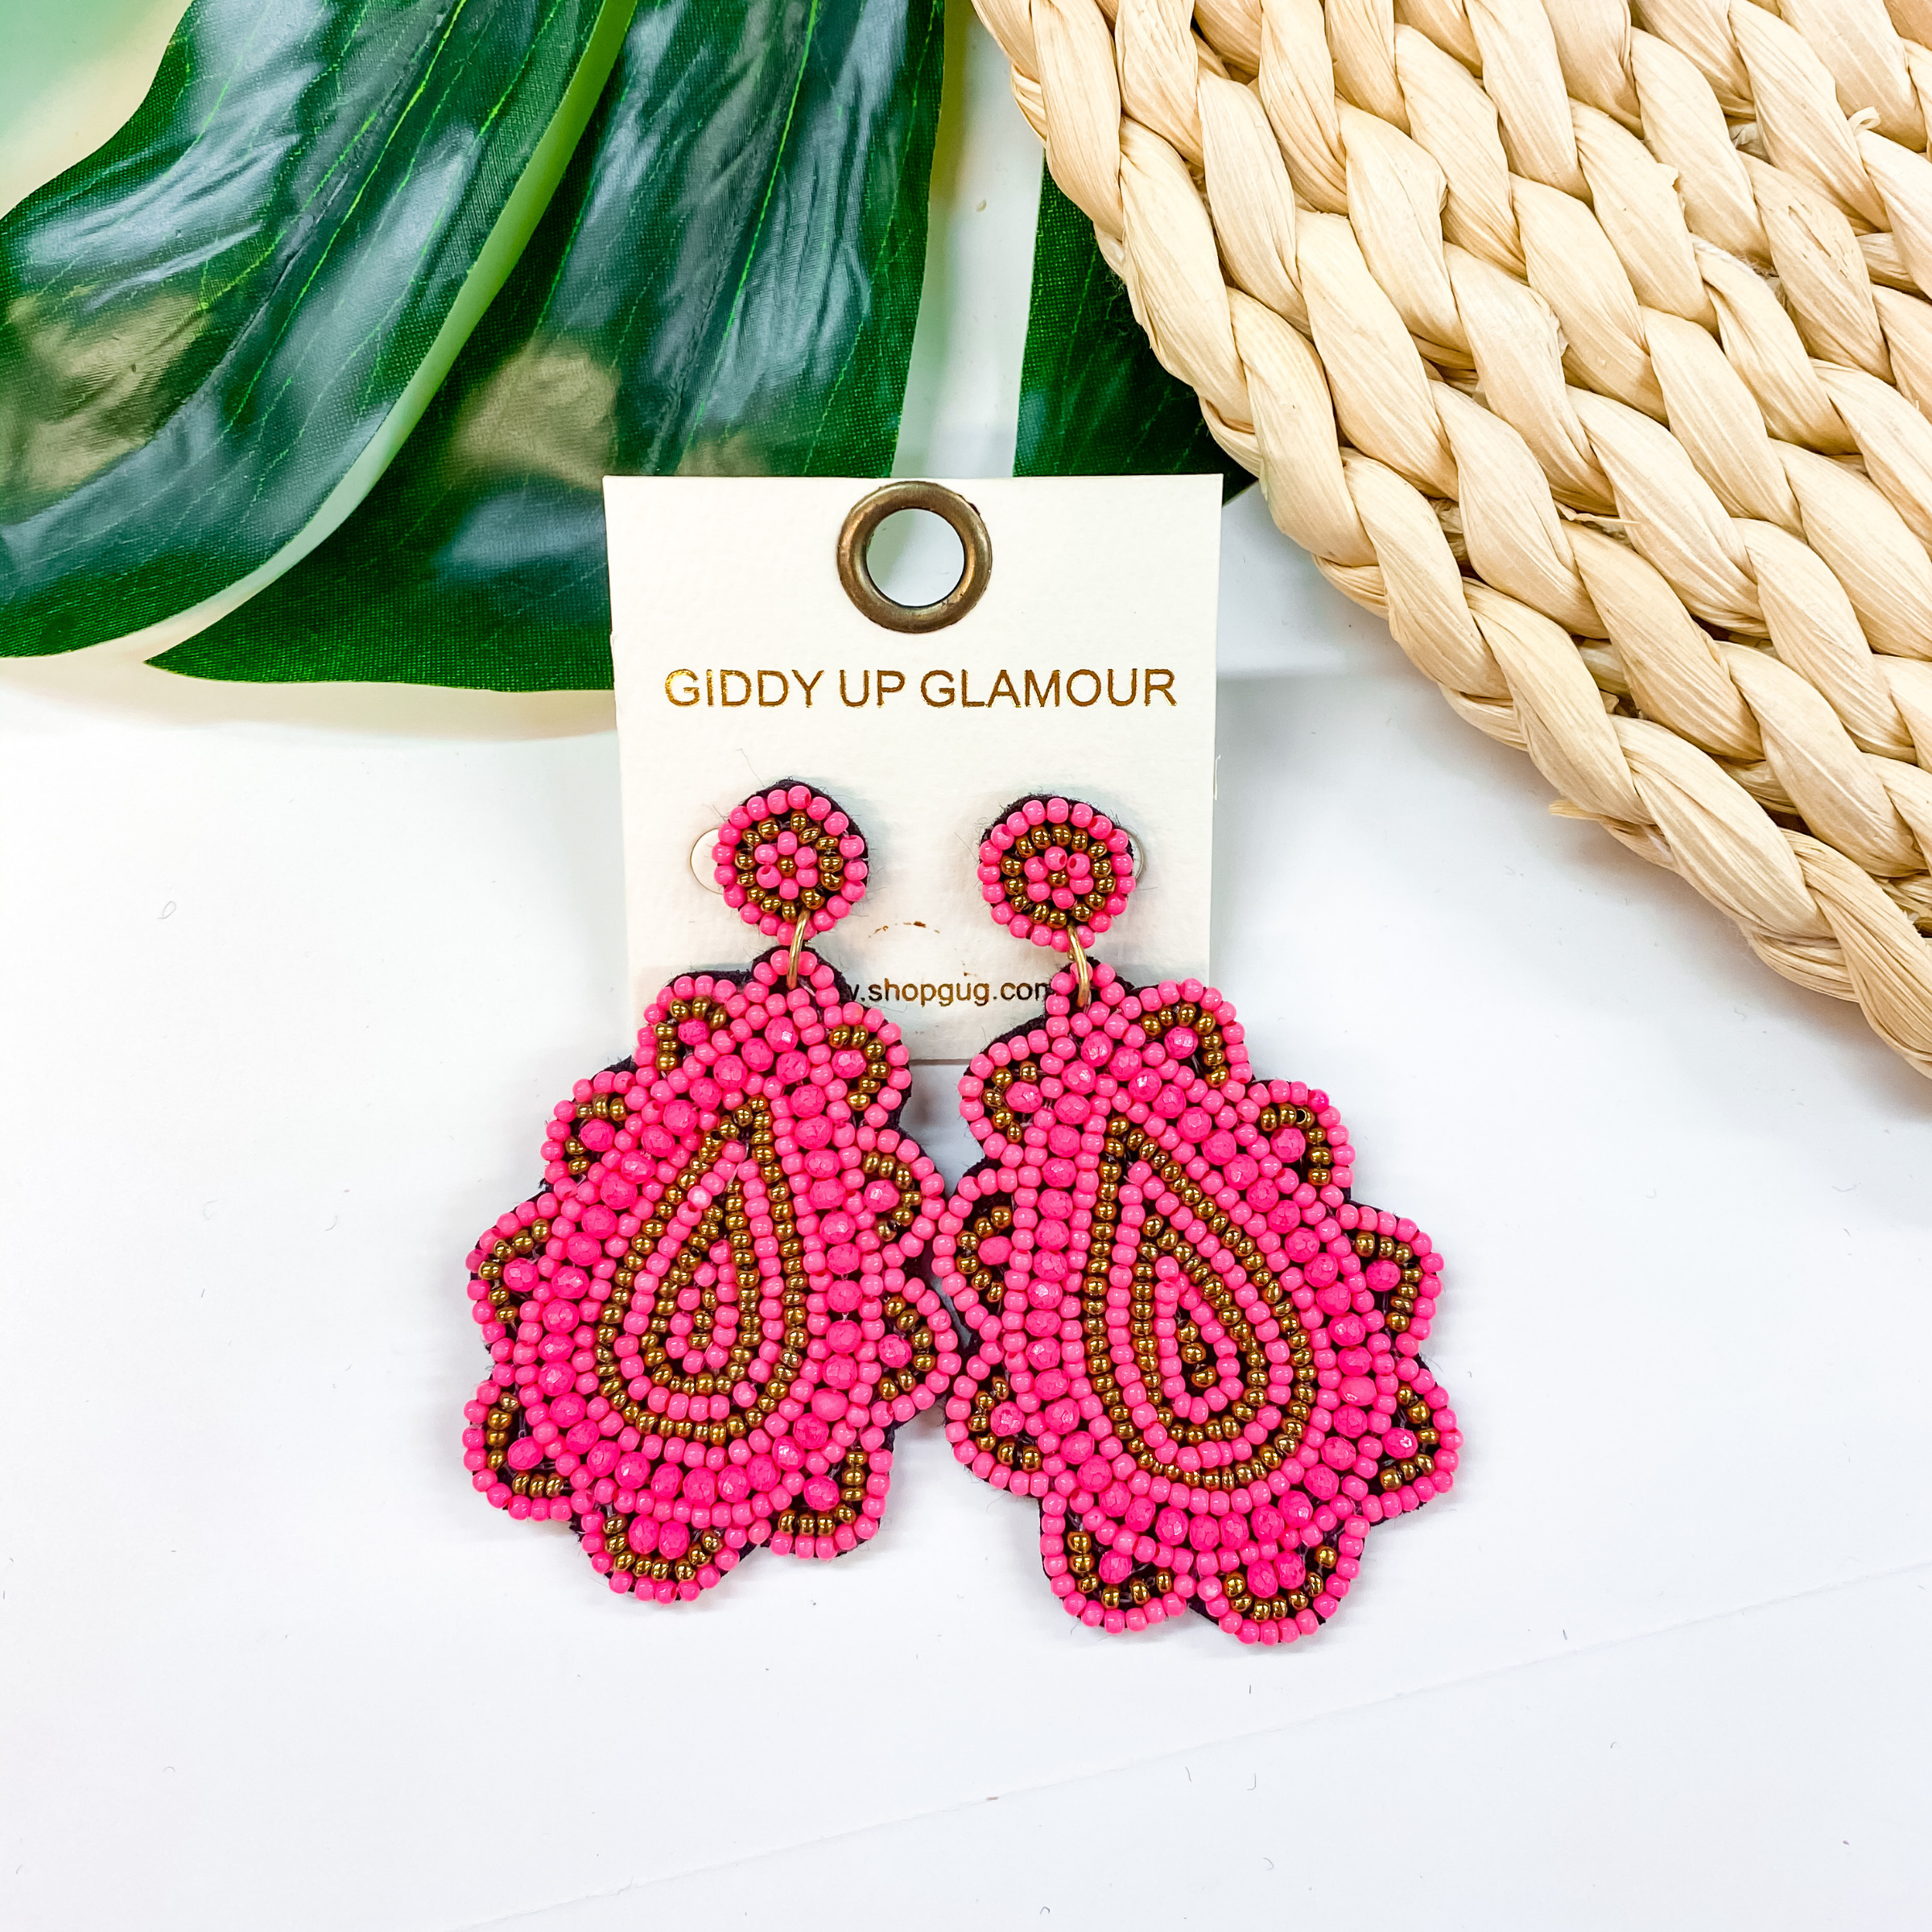 Light Up The Night Seed Bead Teardrop Earrings in Pink - Giddy Up Glamour Boutique